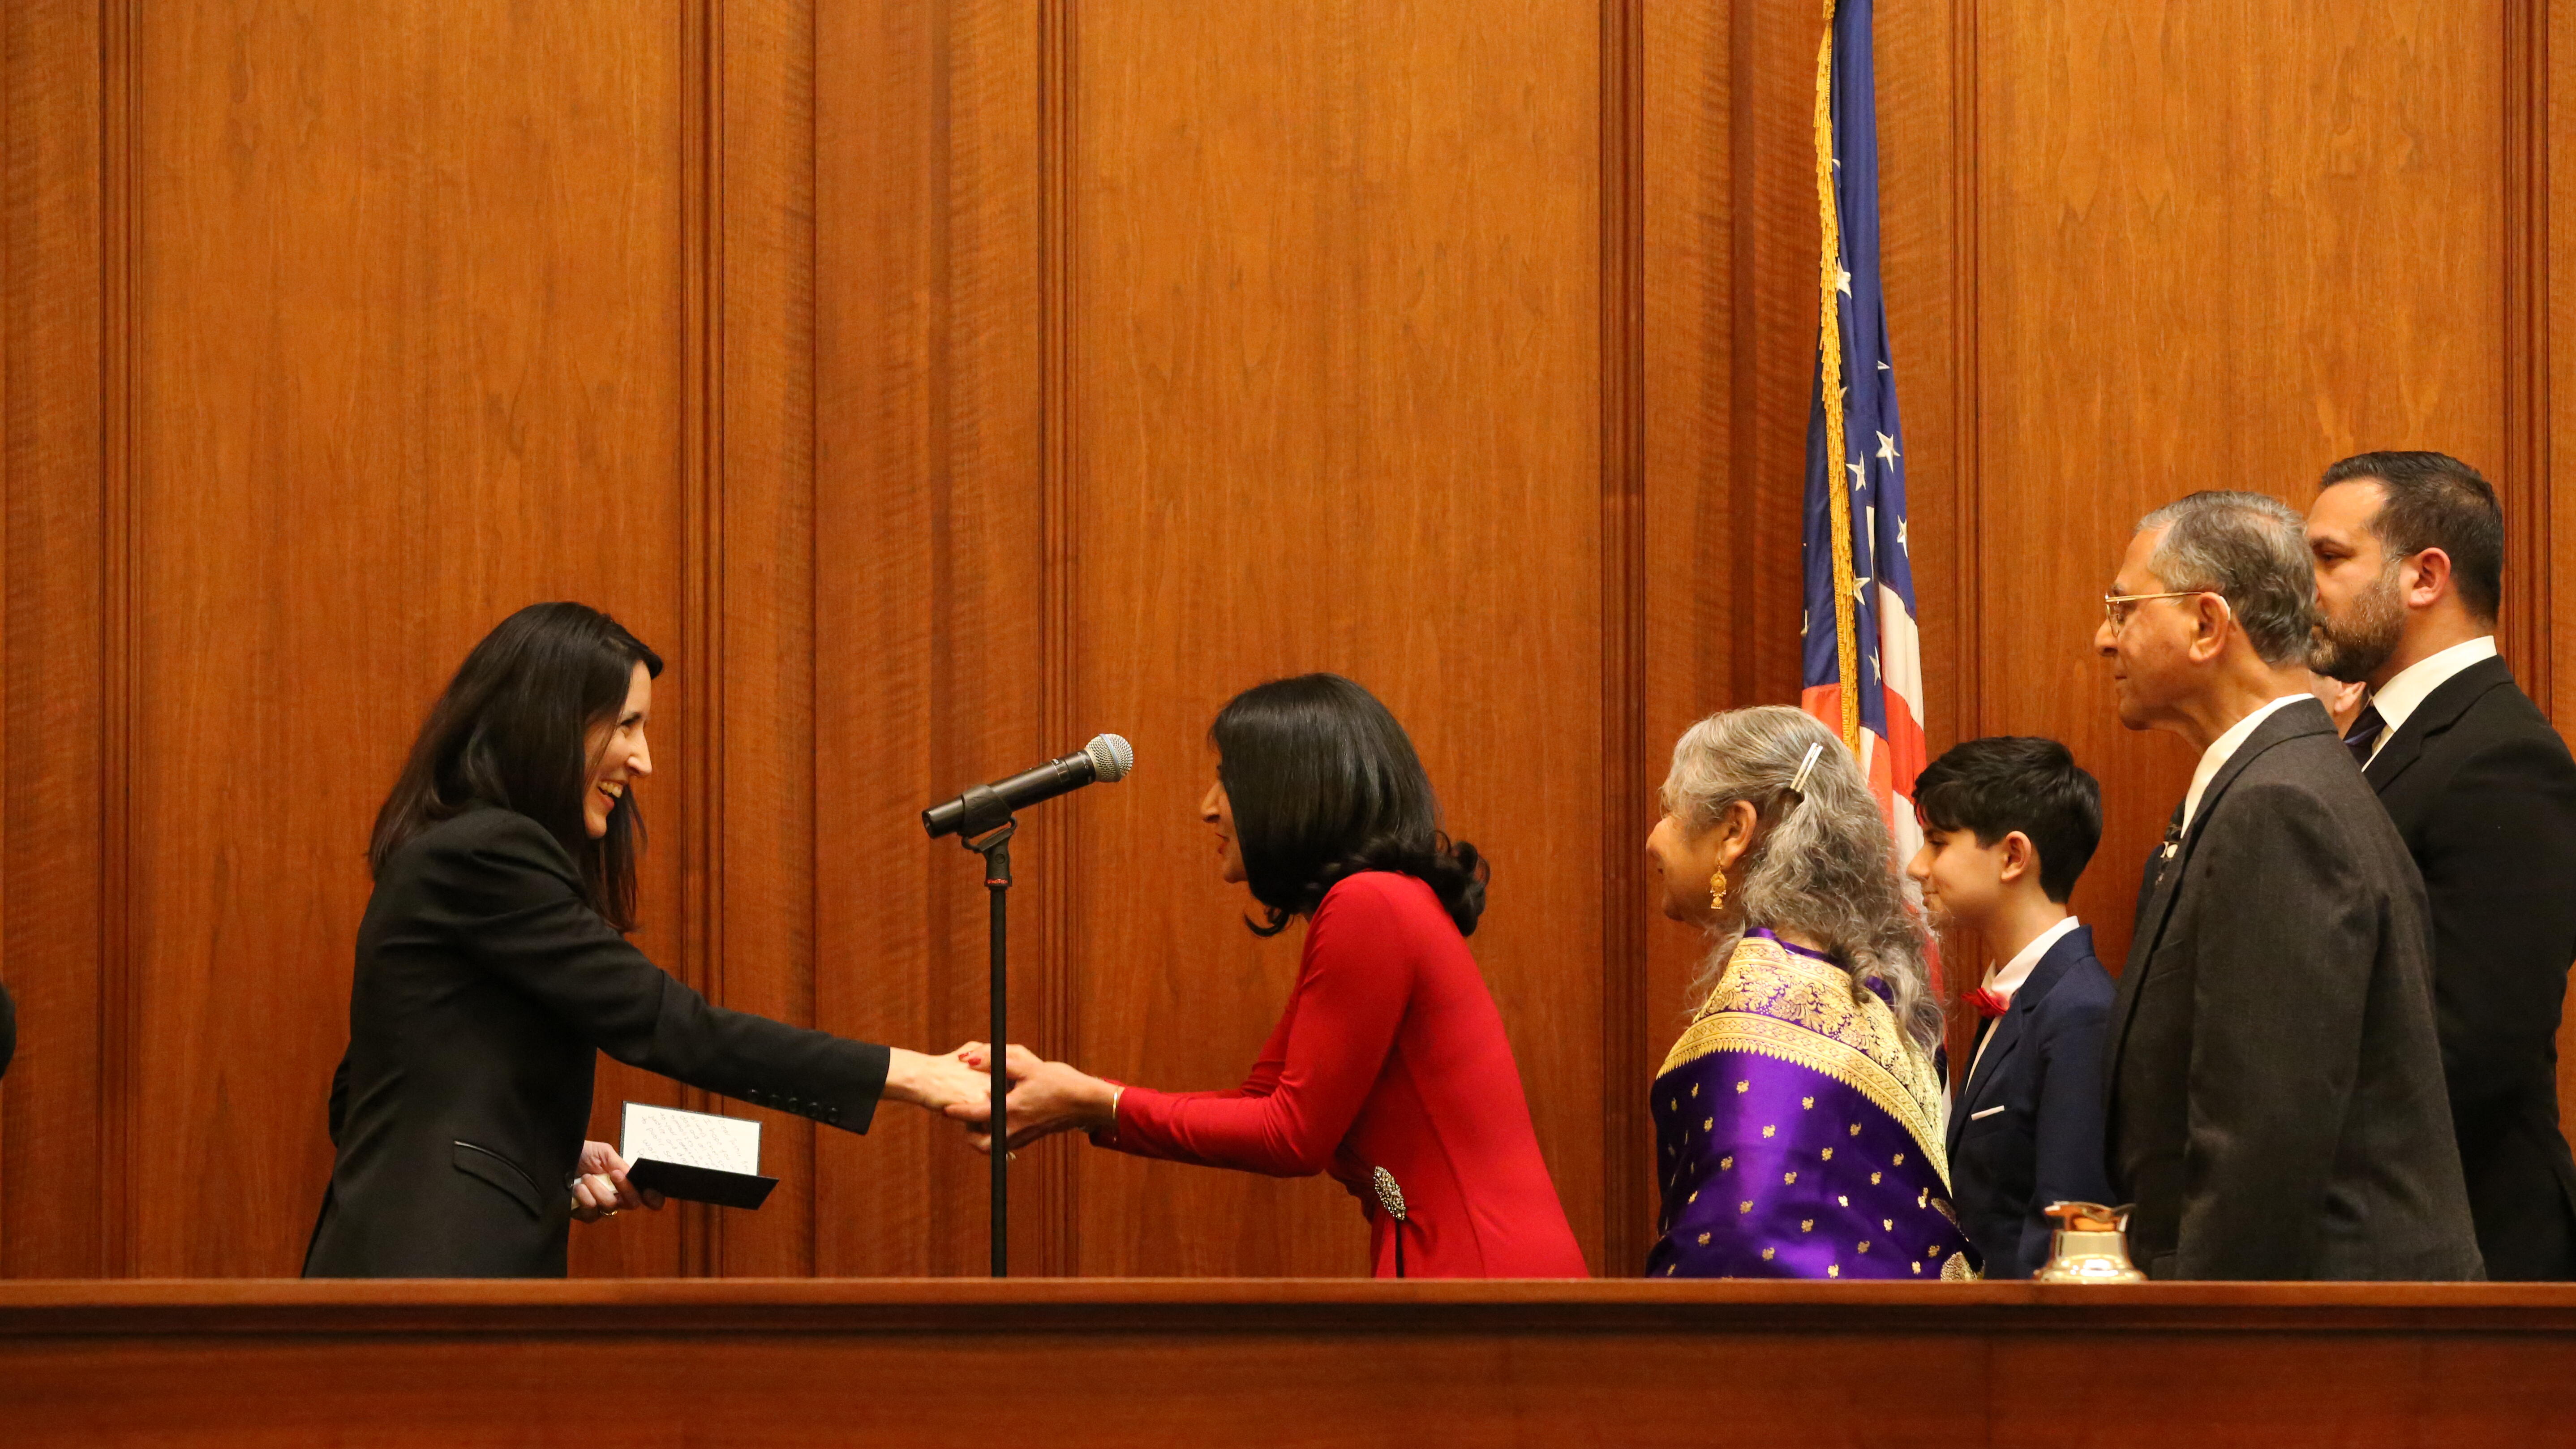 Chief Justice Guerrero shaking hands with Justice Mesiwala during COJA